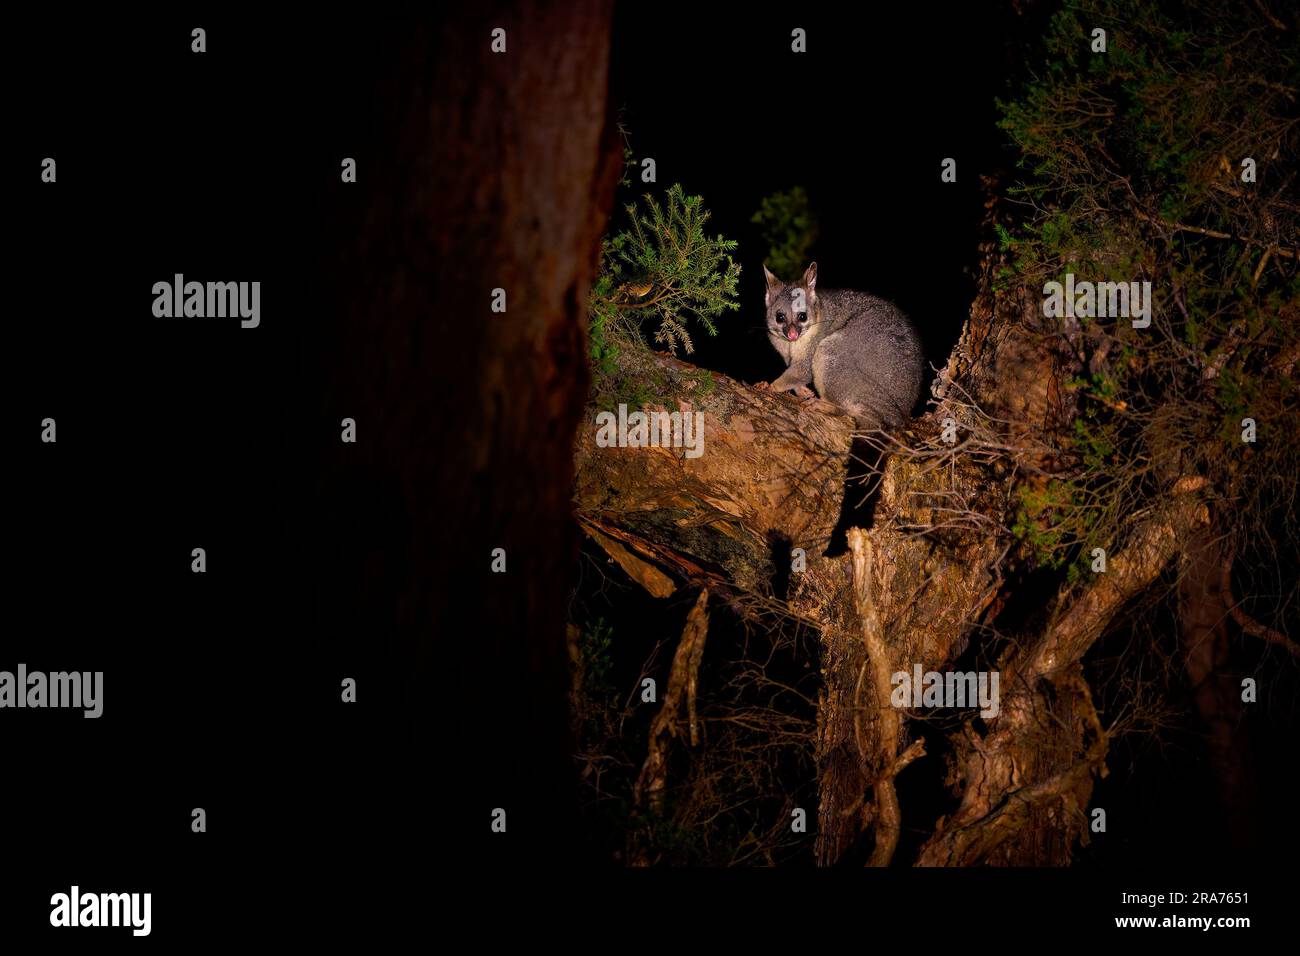 Common Brush-tailed Possum - Trichosurus vulpecula -nocturnal, semi-arboreal marsupial of Australia, introduced to New Zealand. Cute mammal on the tre Stock Photo